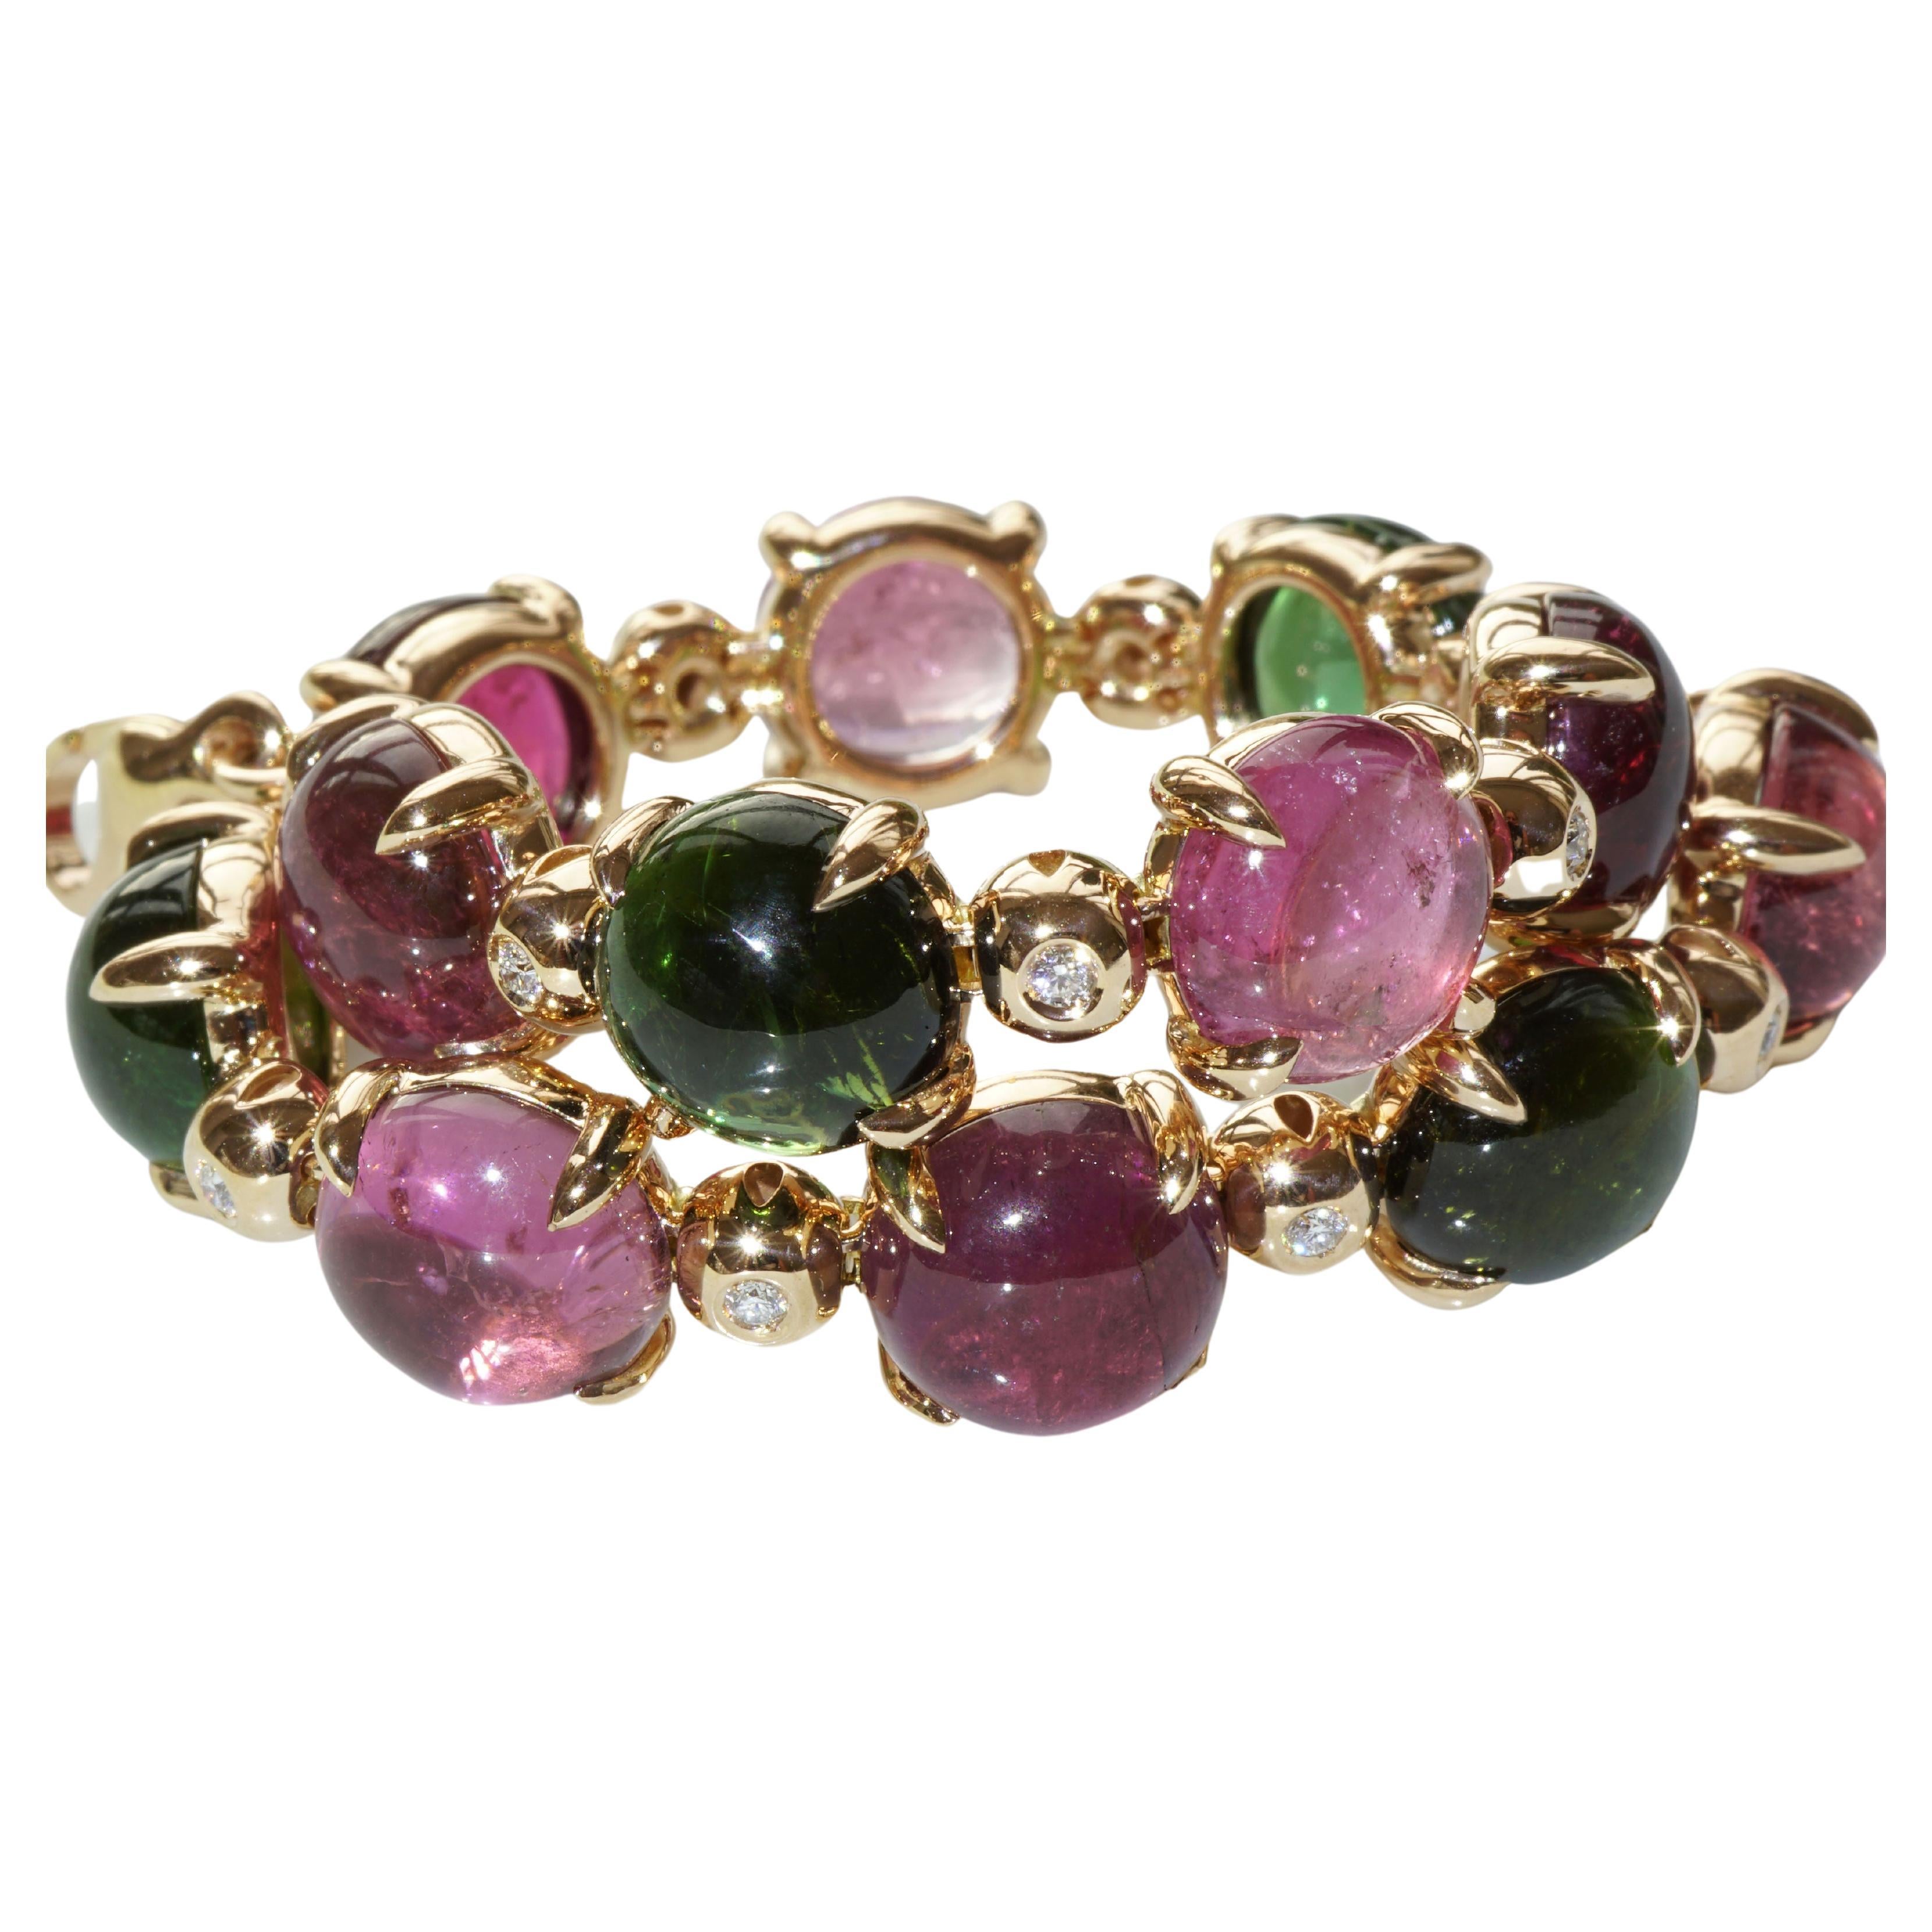 Modern Tourmaline Bracelet Multicolor 50 Ct Transparency and Luminosity TOP 18kt For Sale